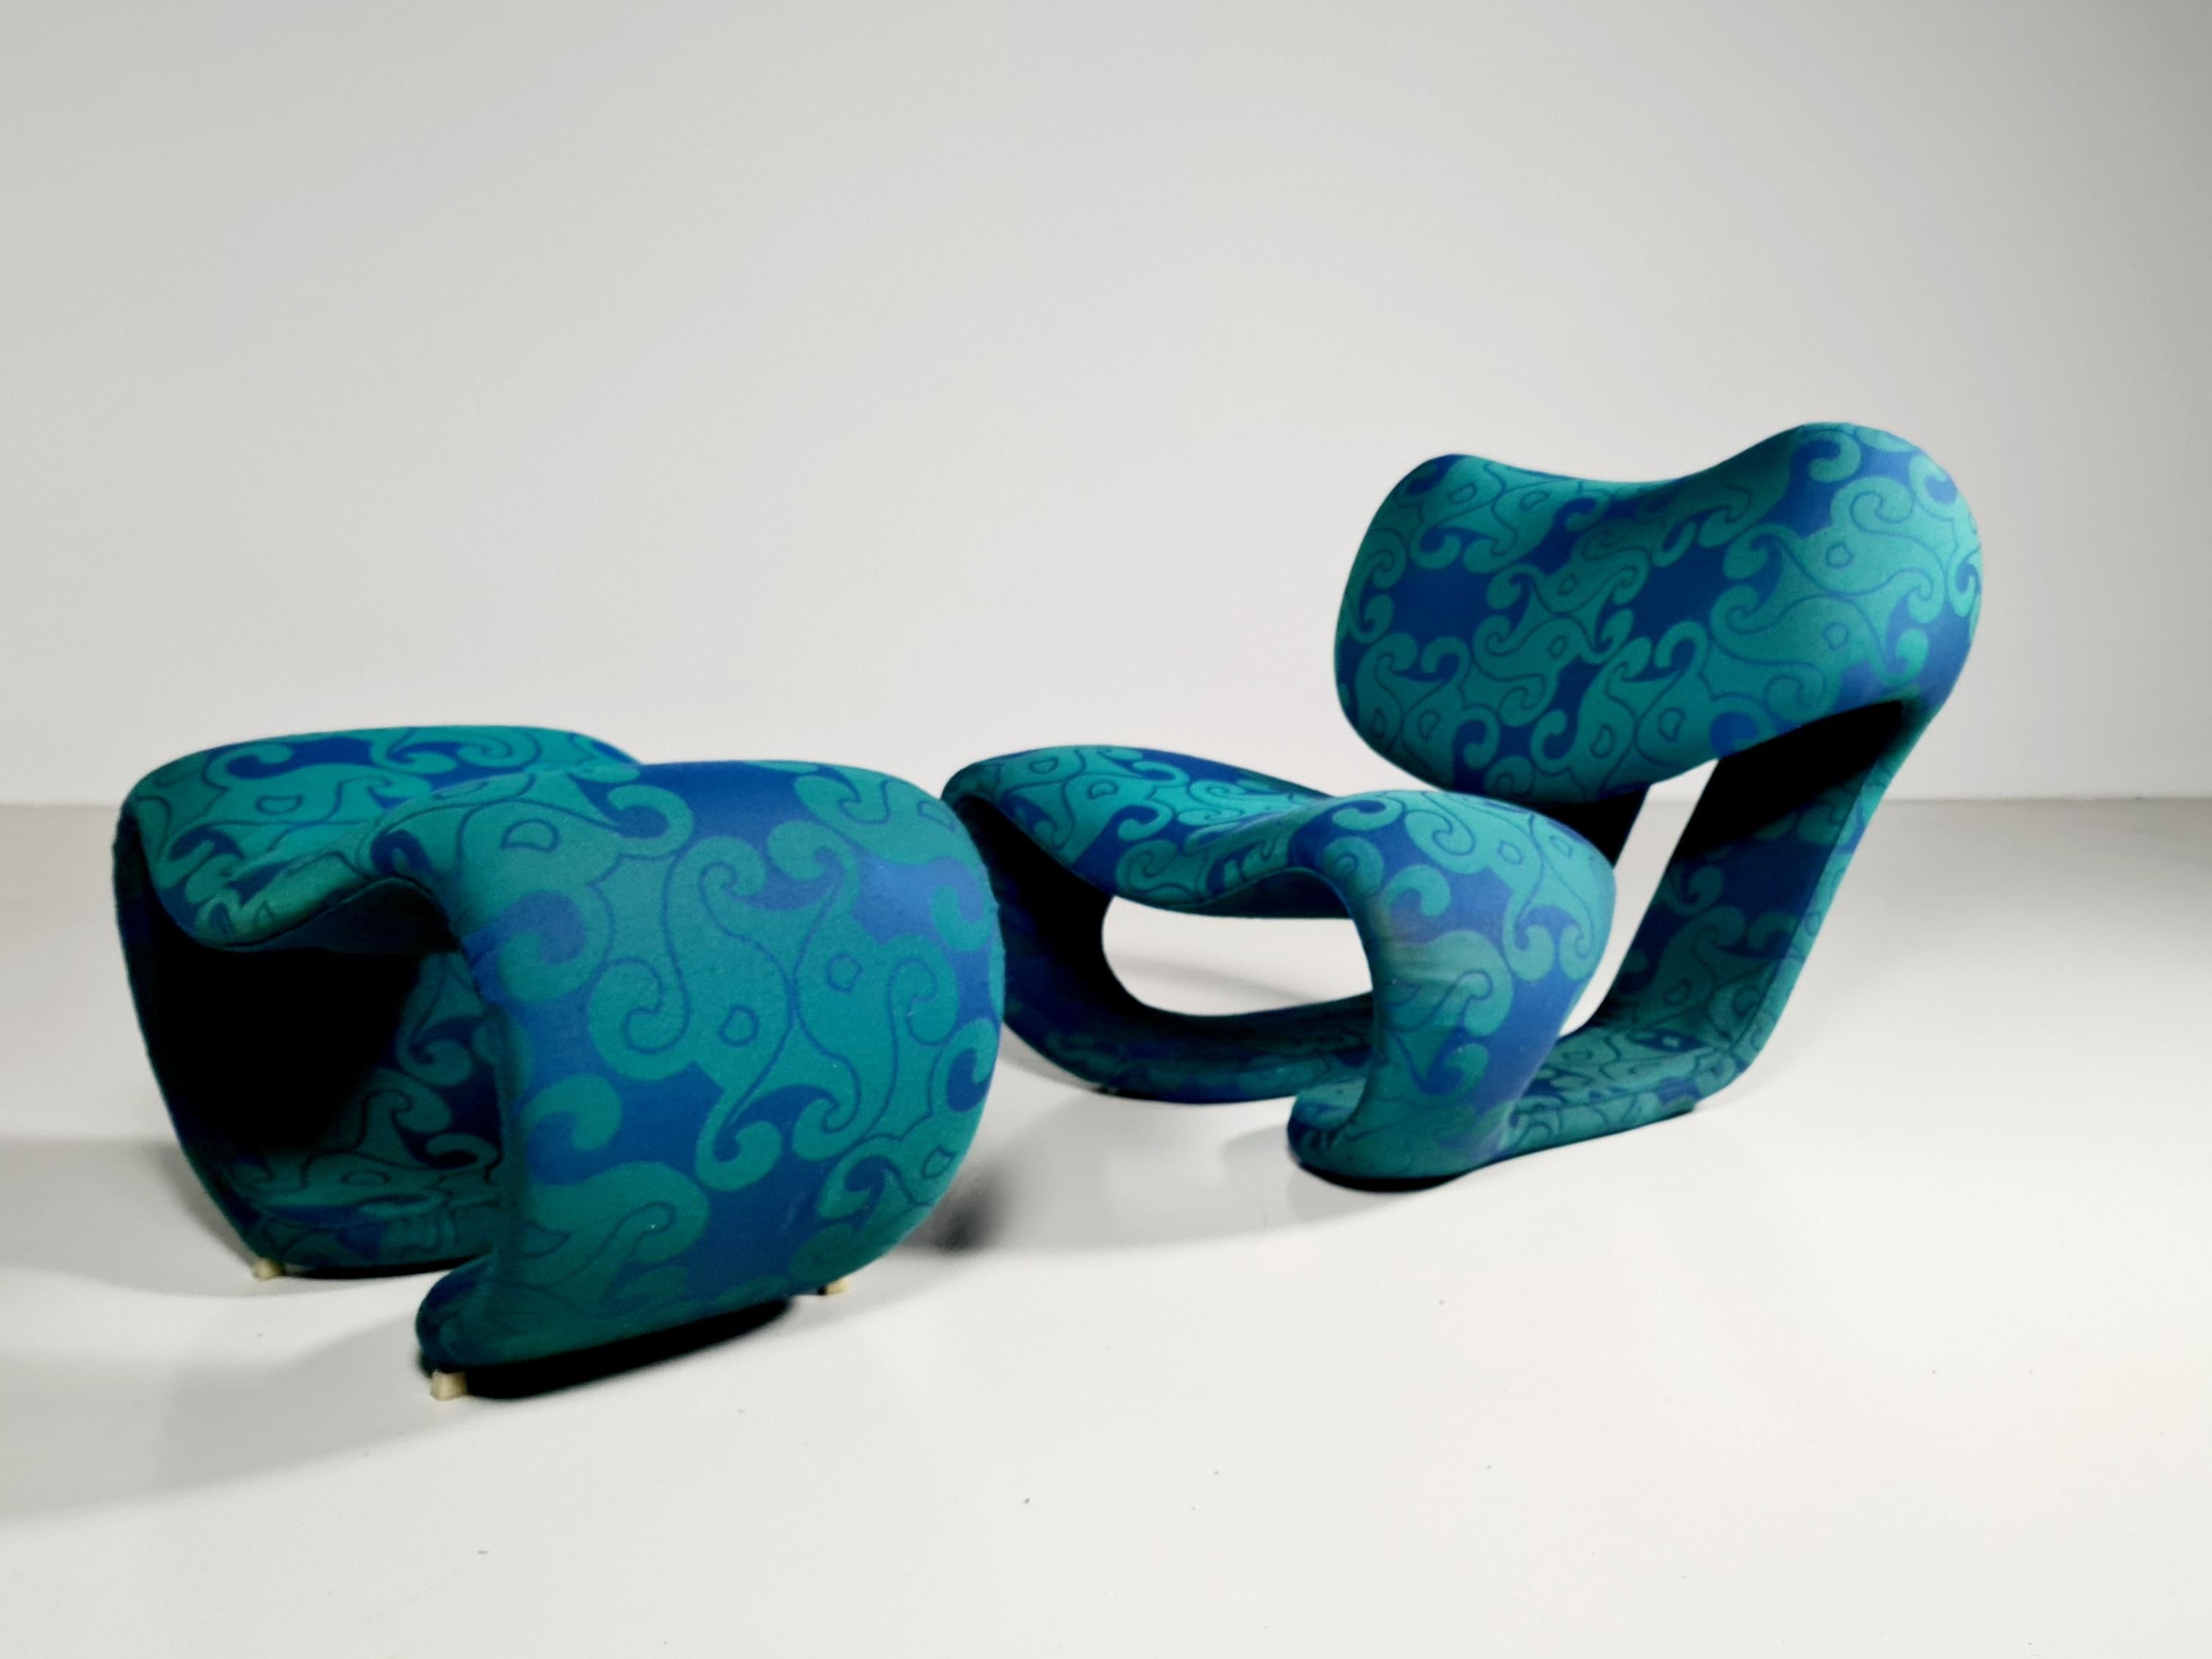 Jacquard Scultura 190 Lounge Chair with Ottoman by Vittorio Introini for Saporiti, 1970s For Sale